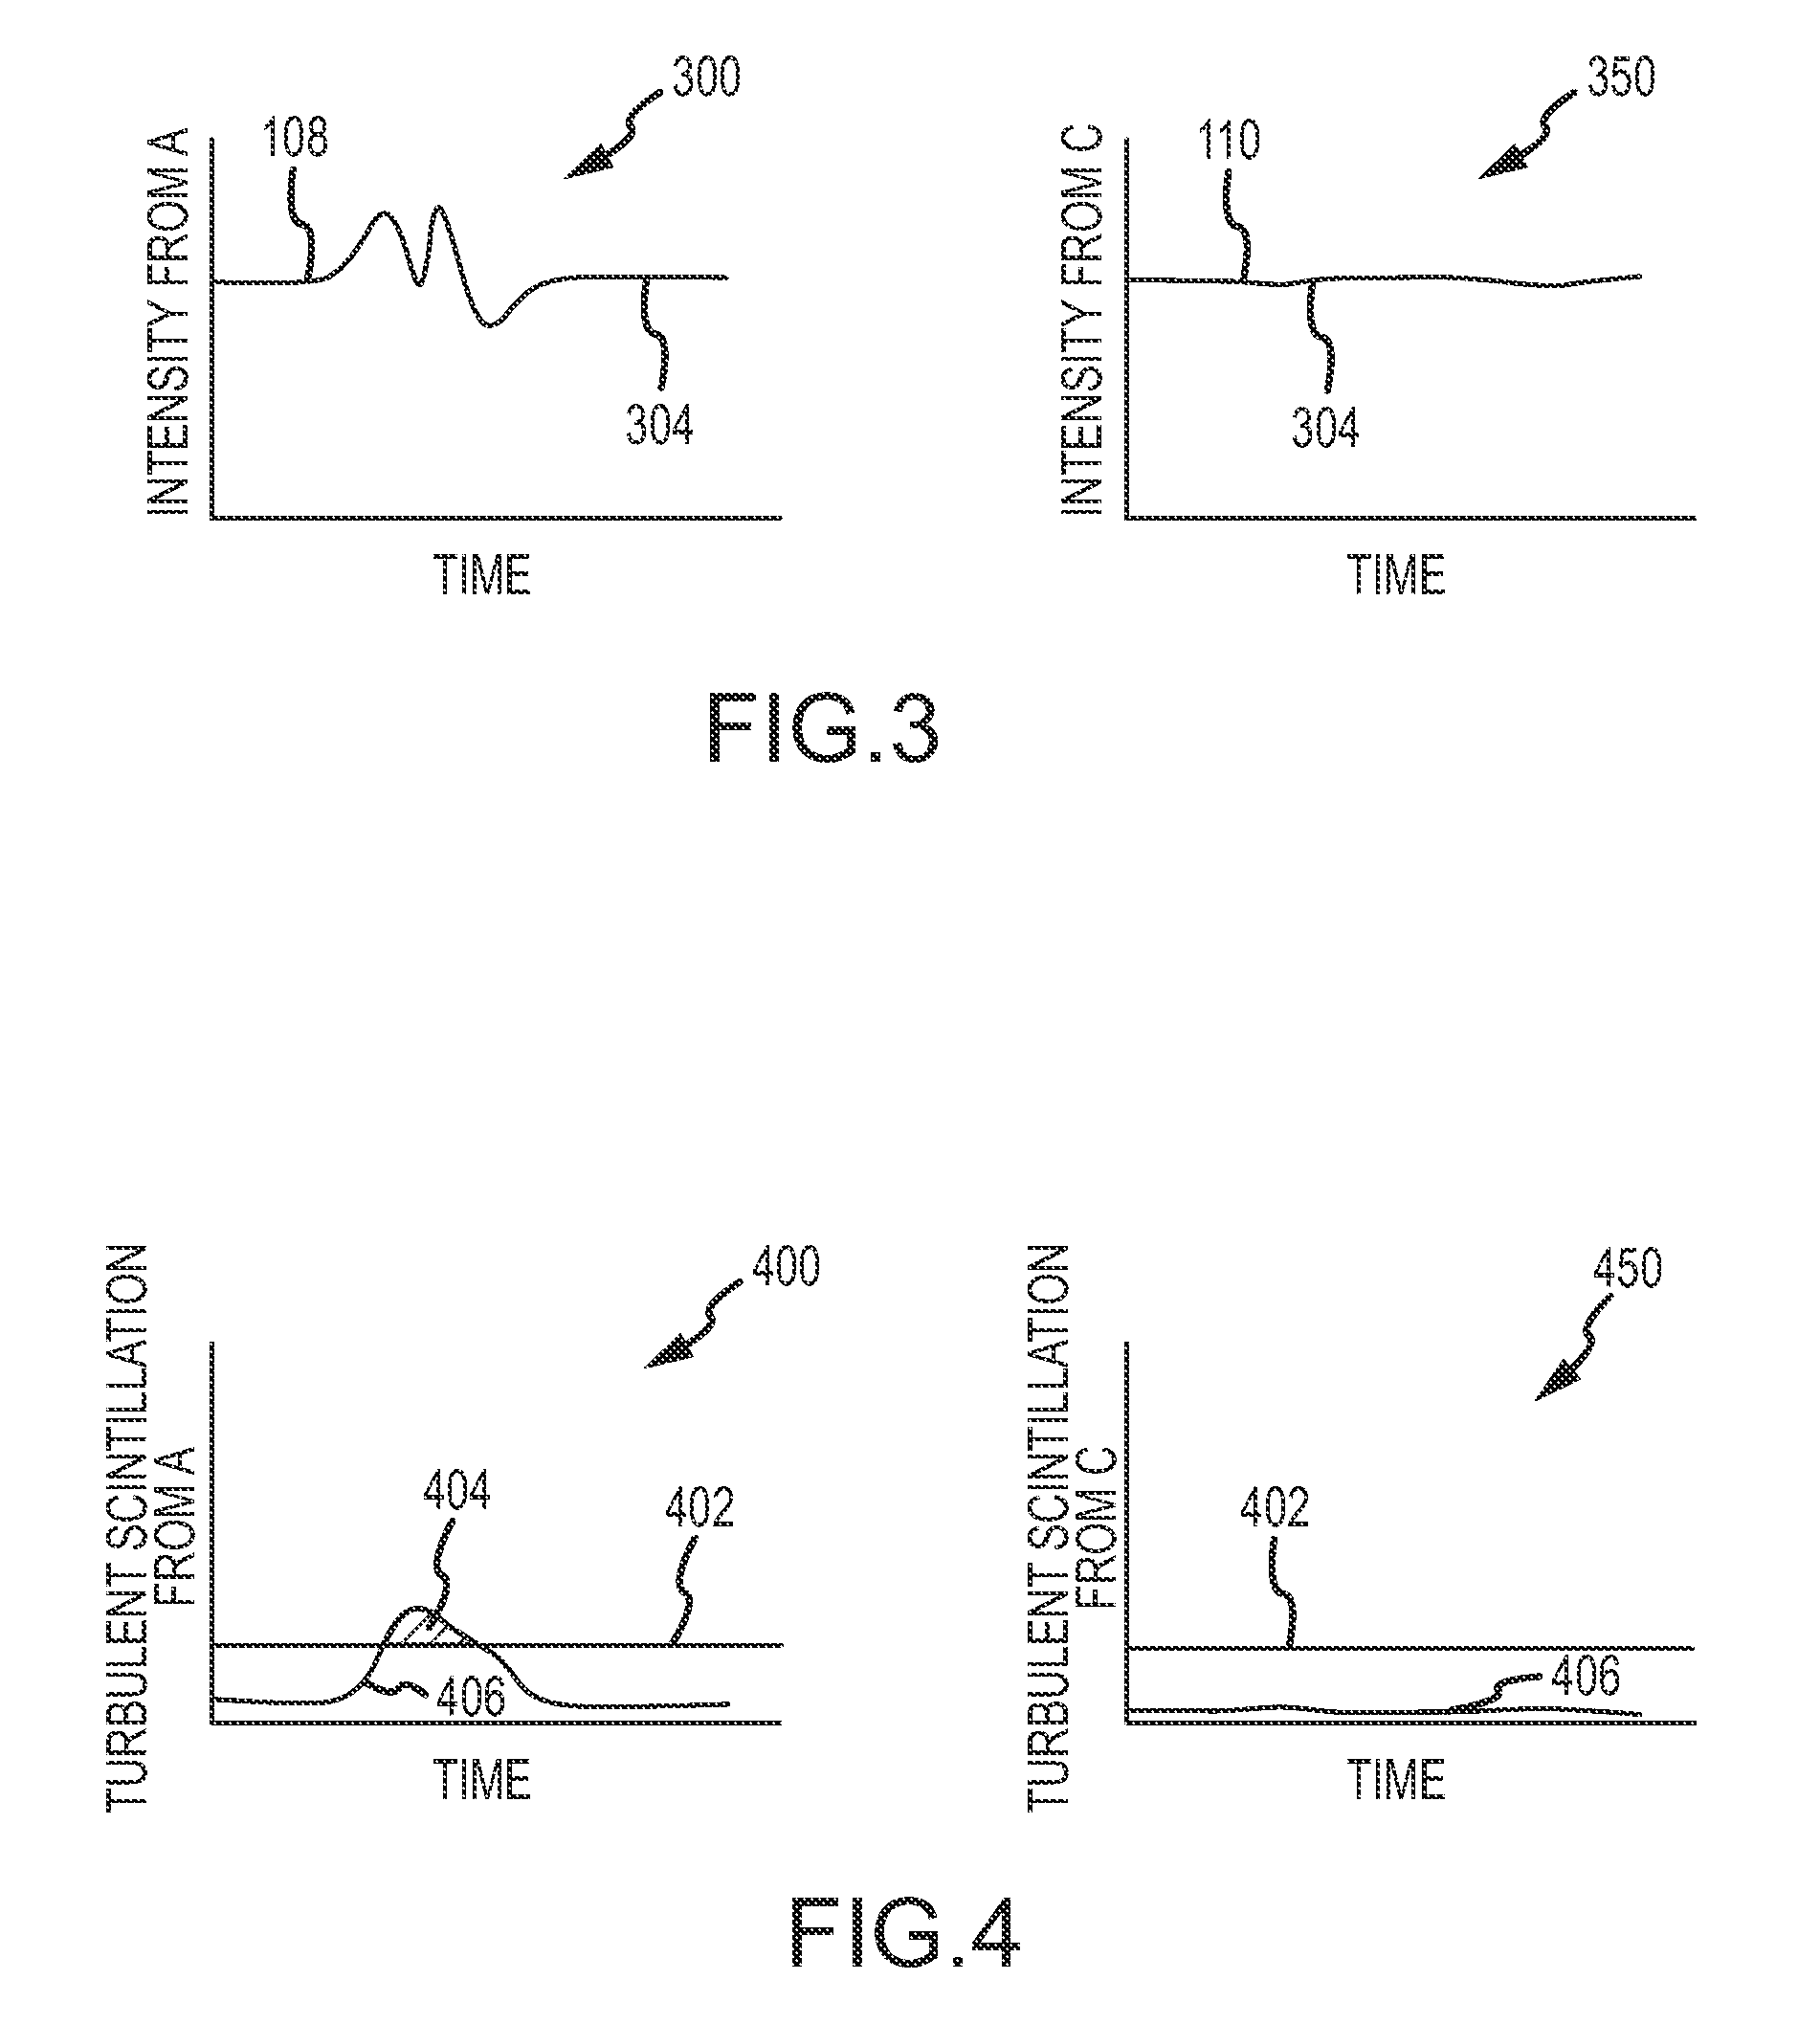 System and methods for detecting turbulence based upon observations of light scintillation